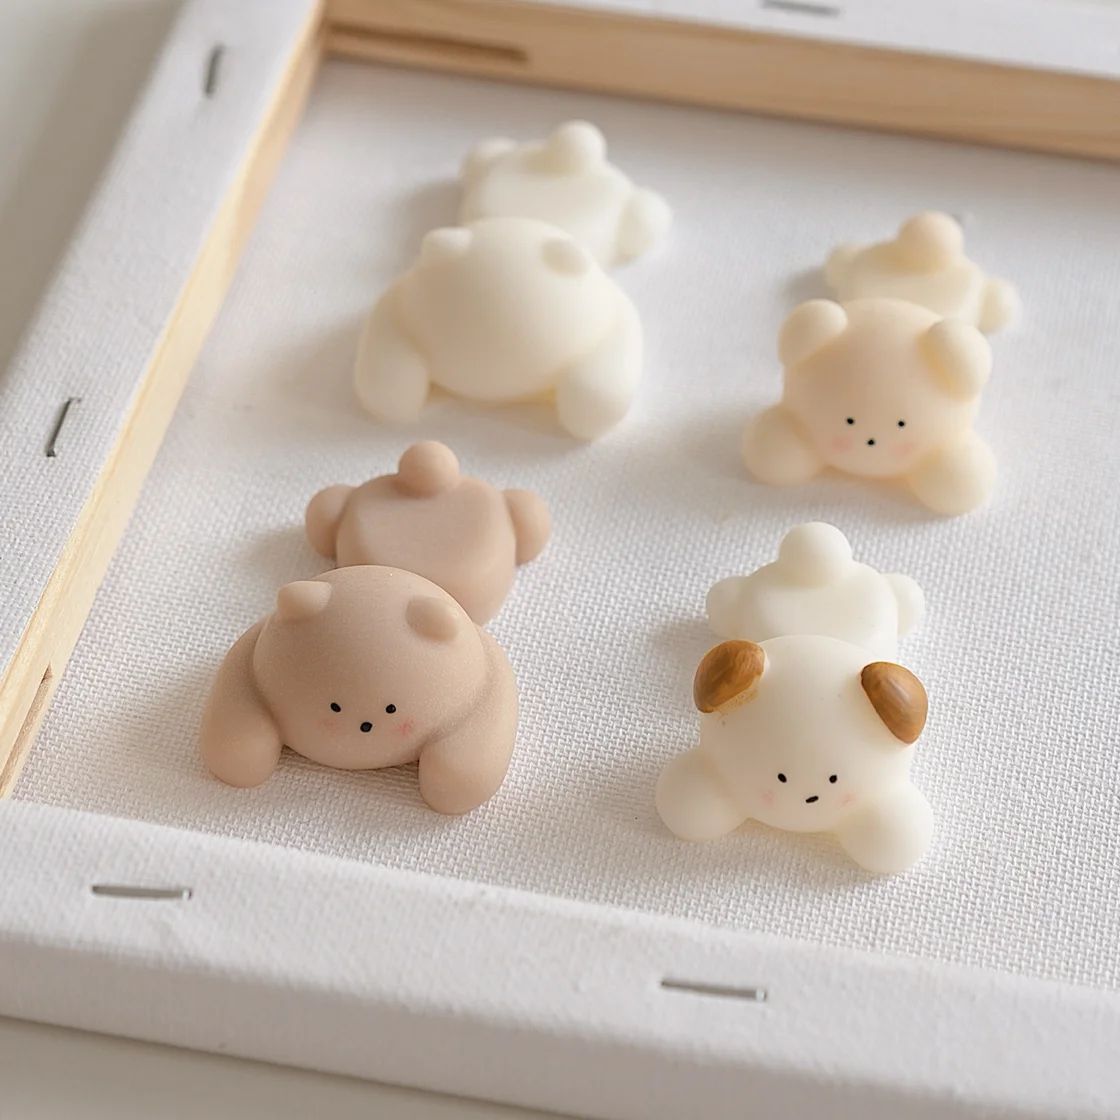 Papa Bear Dog Silicone Candle Mold Diy Scented Candle Material Cute Dessert Candle Deco Small Accessories Candle Making Kit